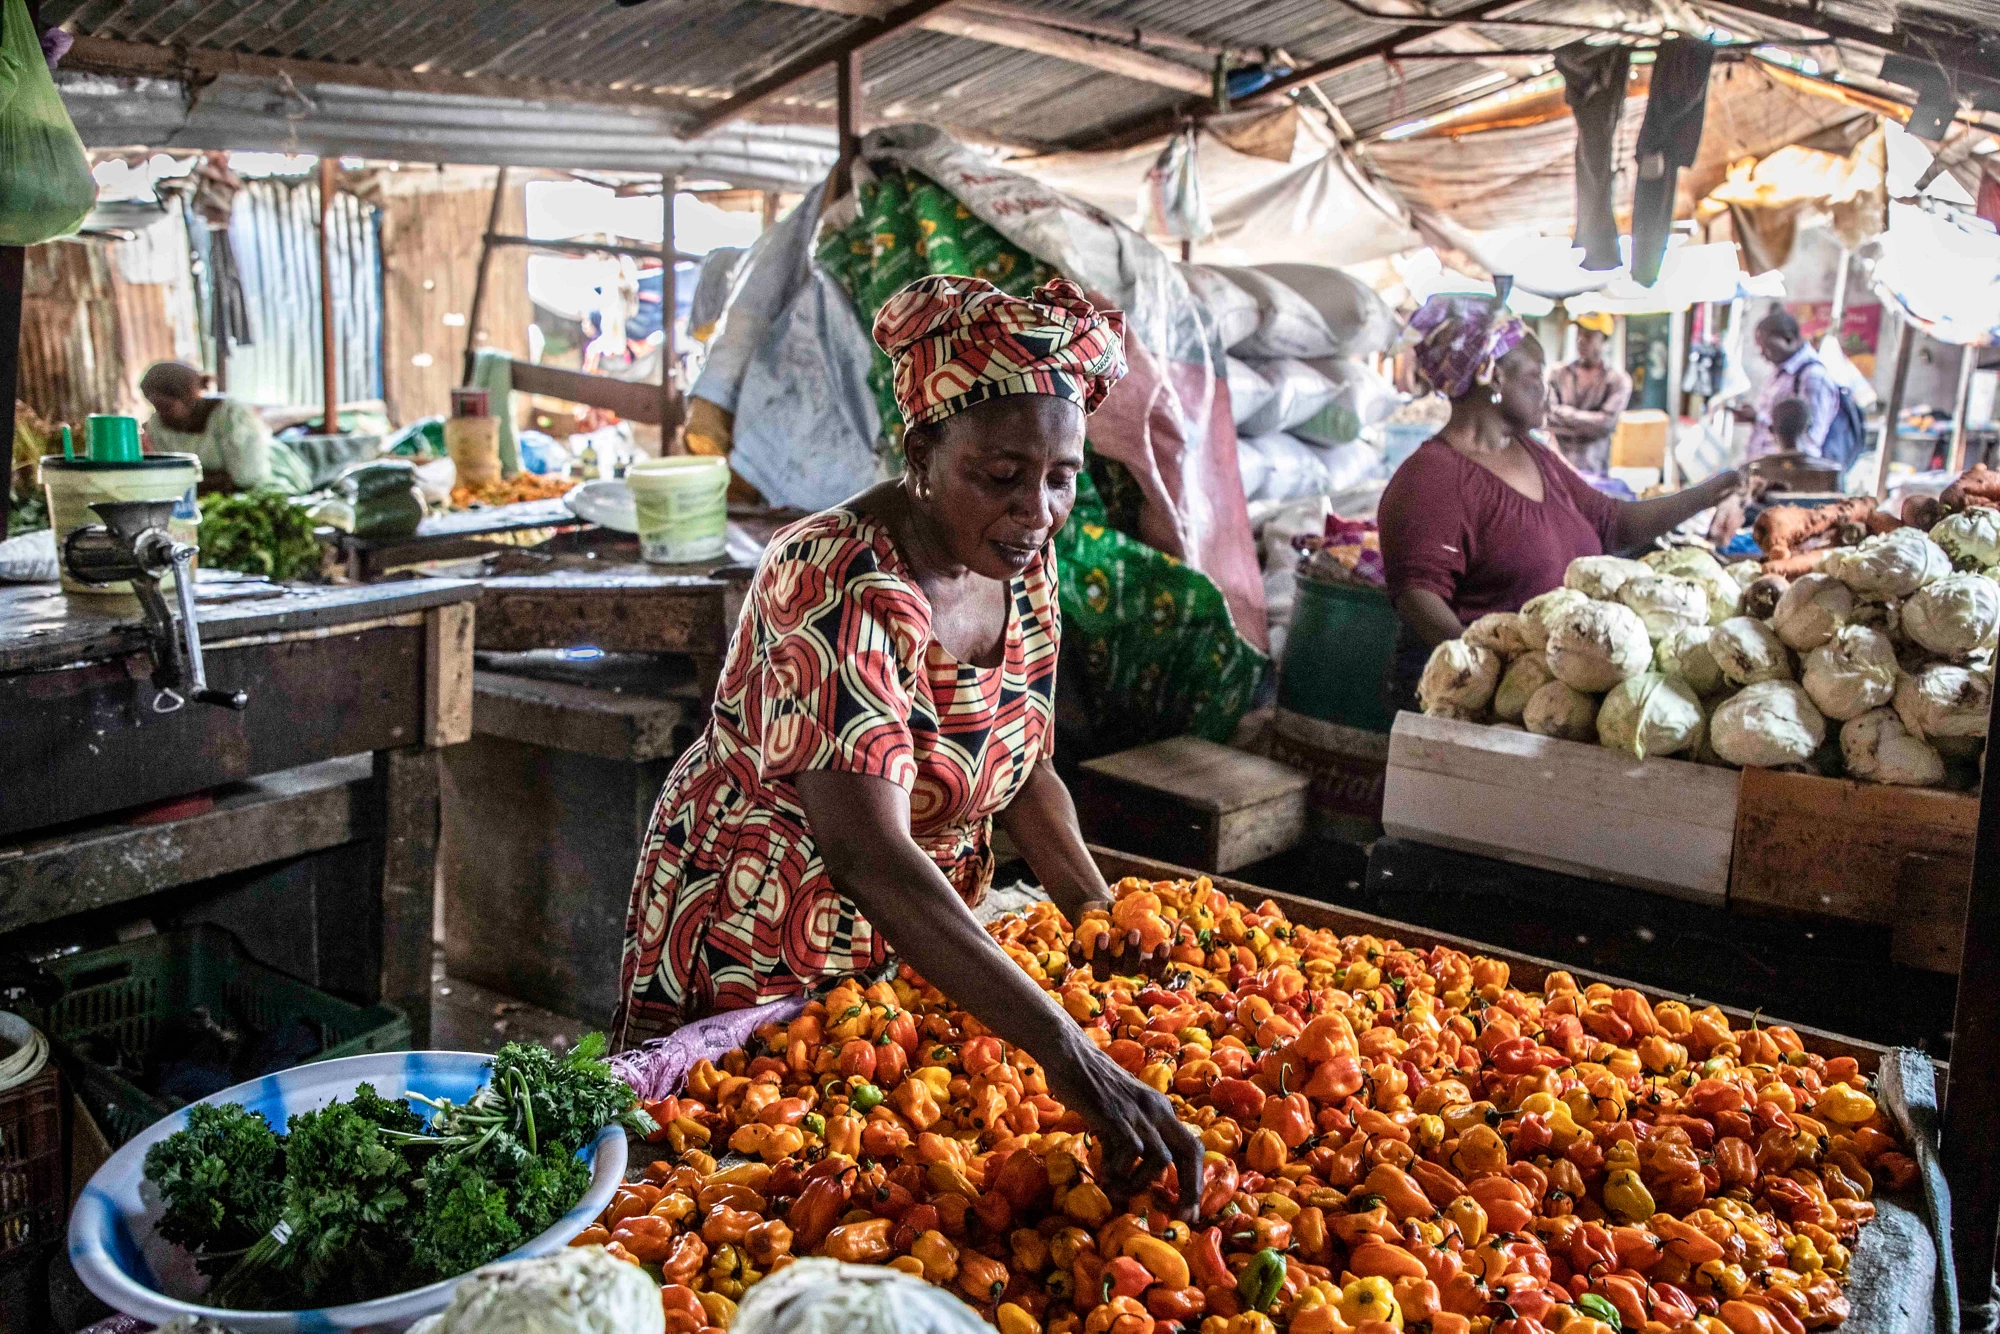 evaluate the impact of having an action plan for small business enterprises’ inclusive growth